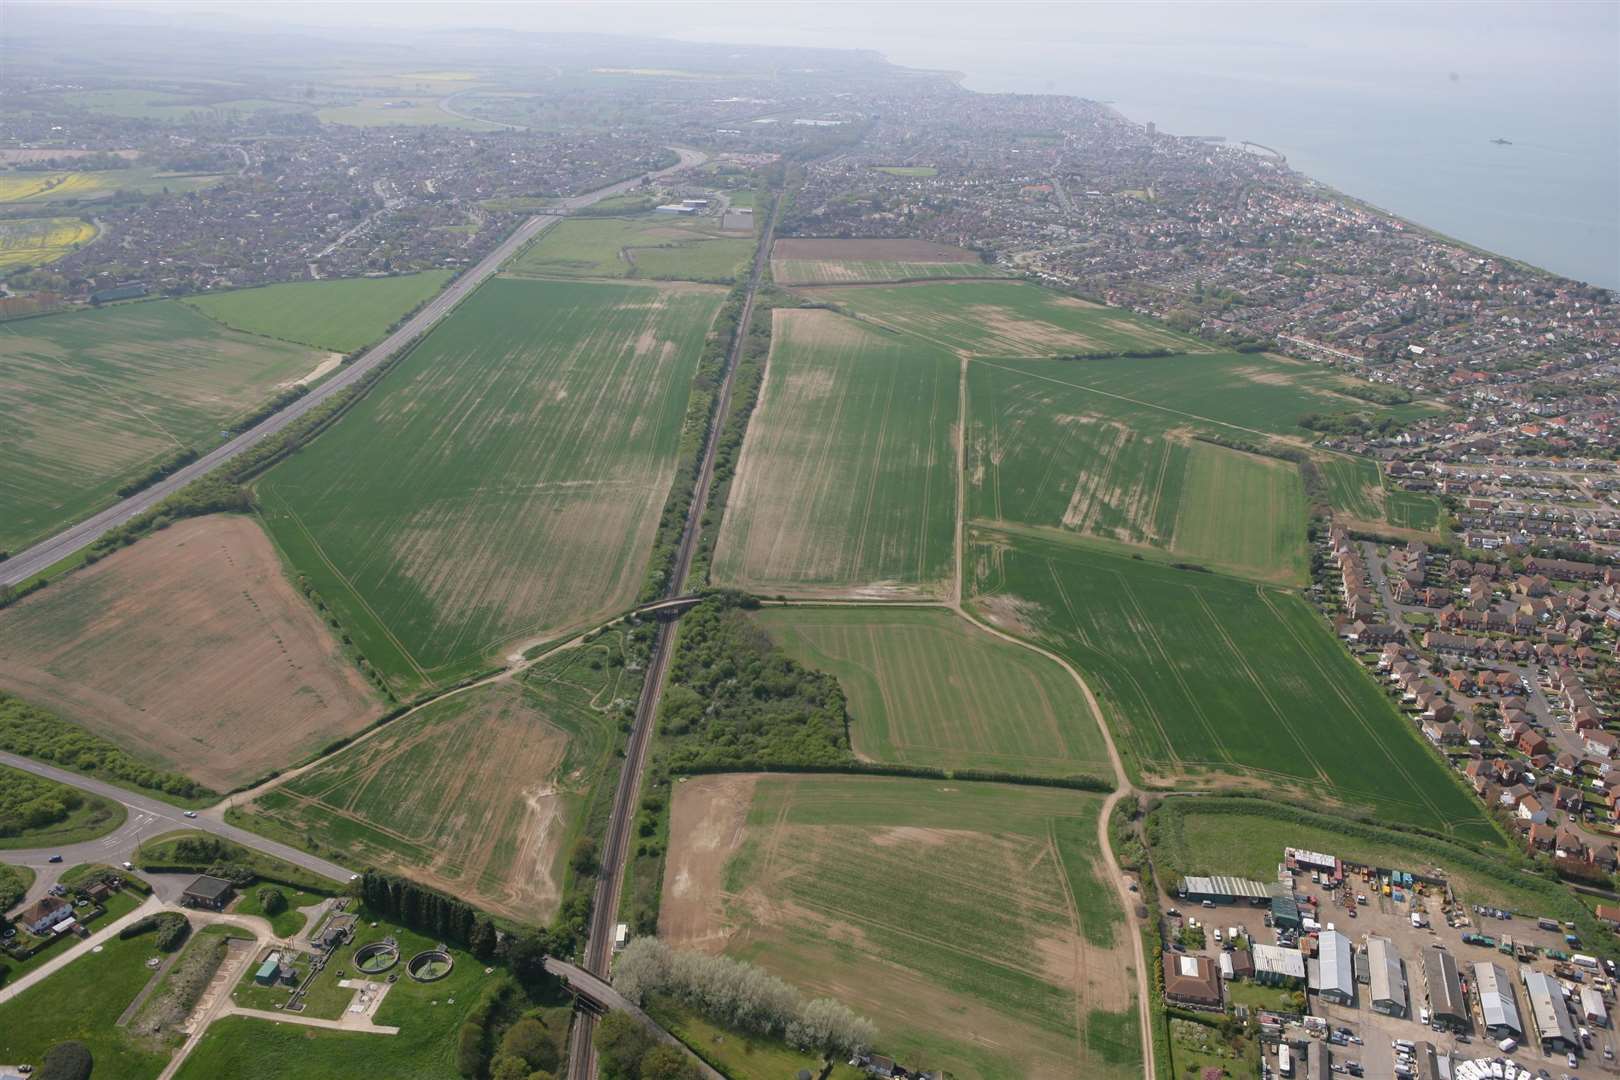 An aerial view of the land at Hillborough